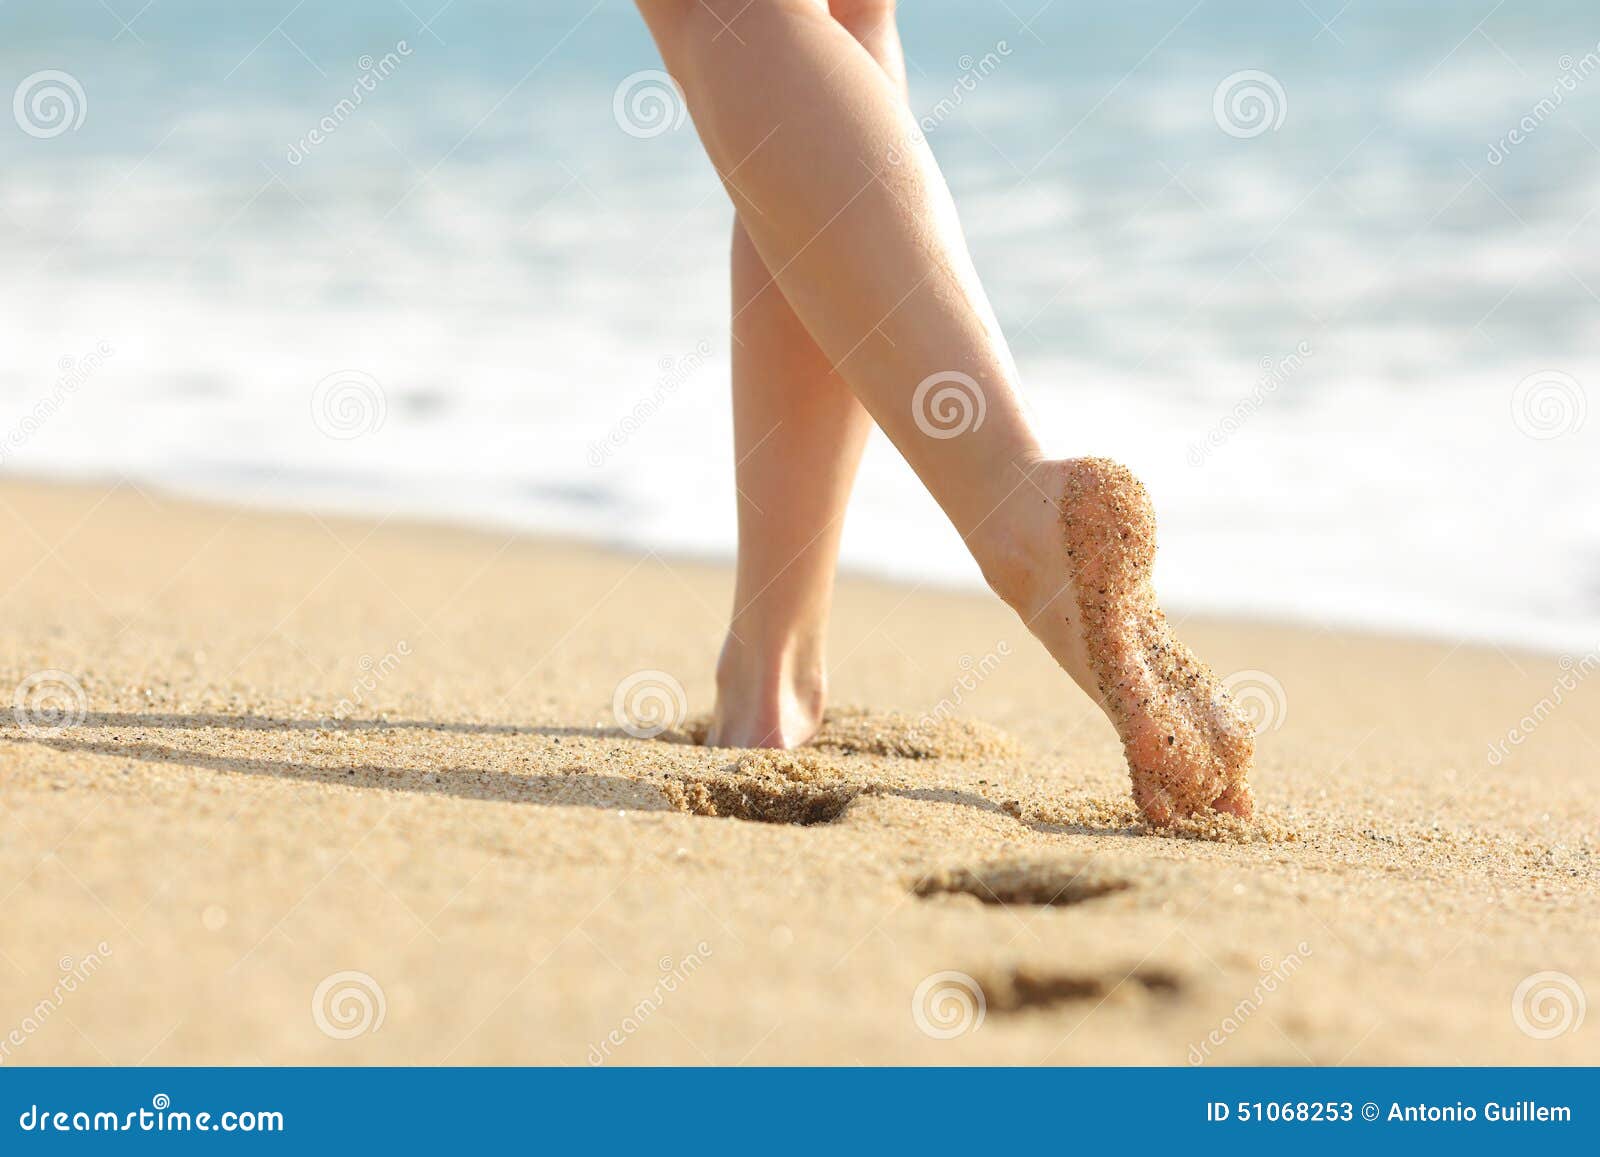 woman legs and feet walking on the sand of the beach